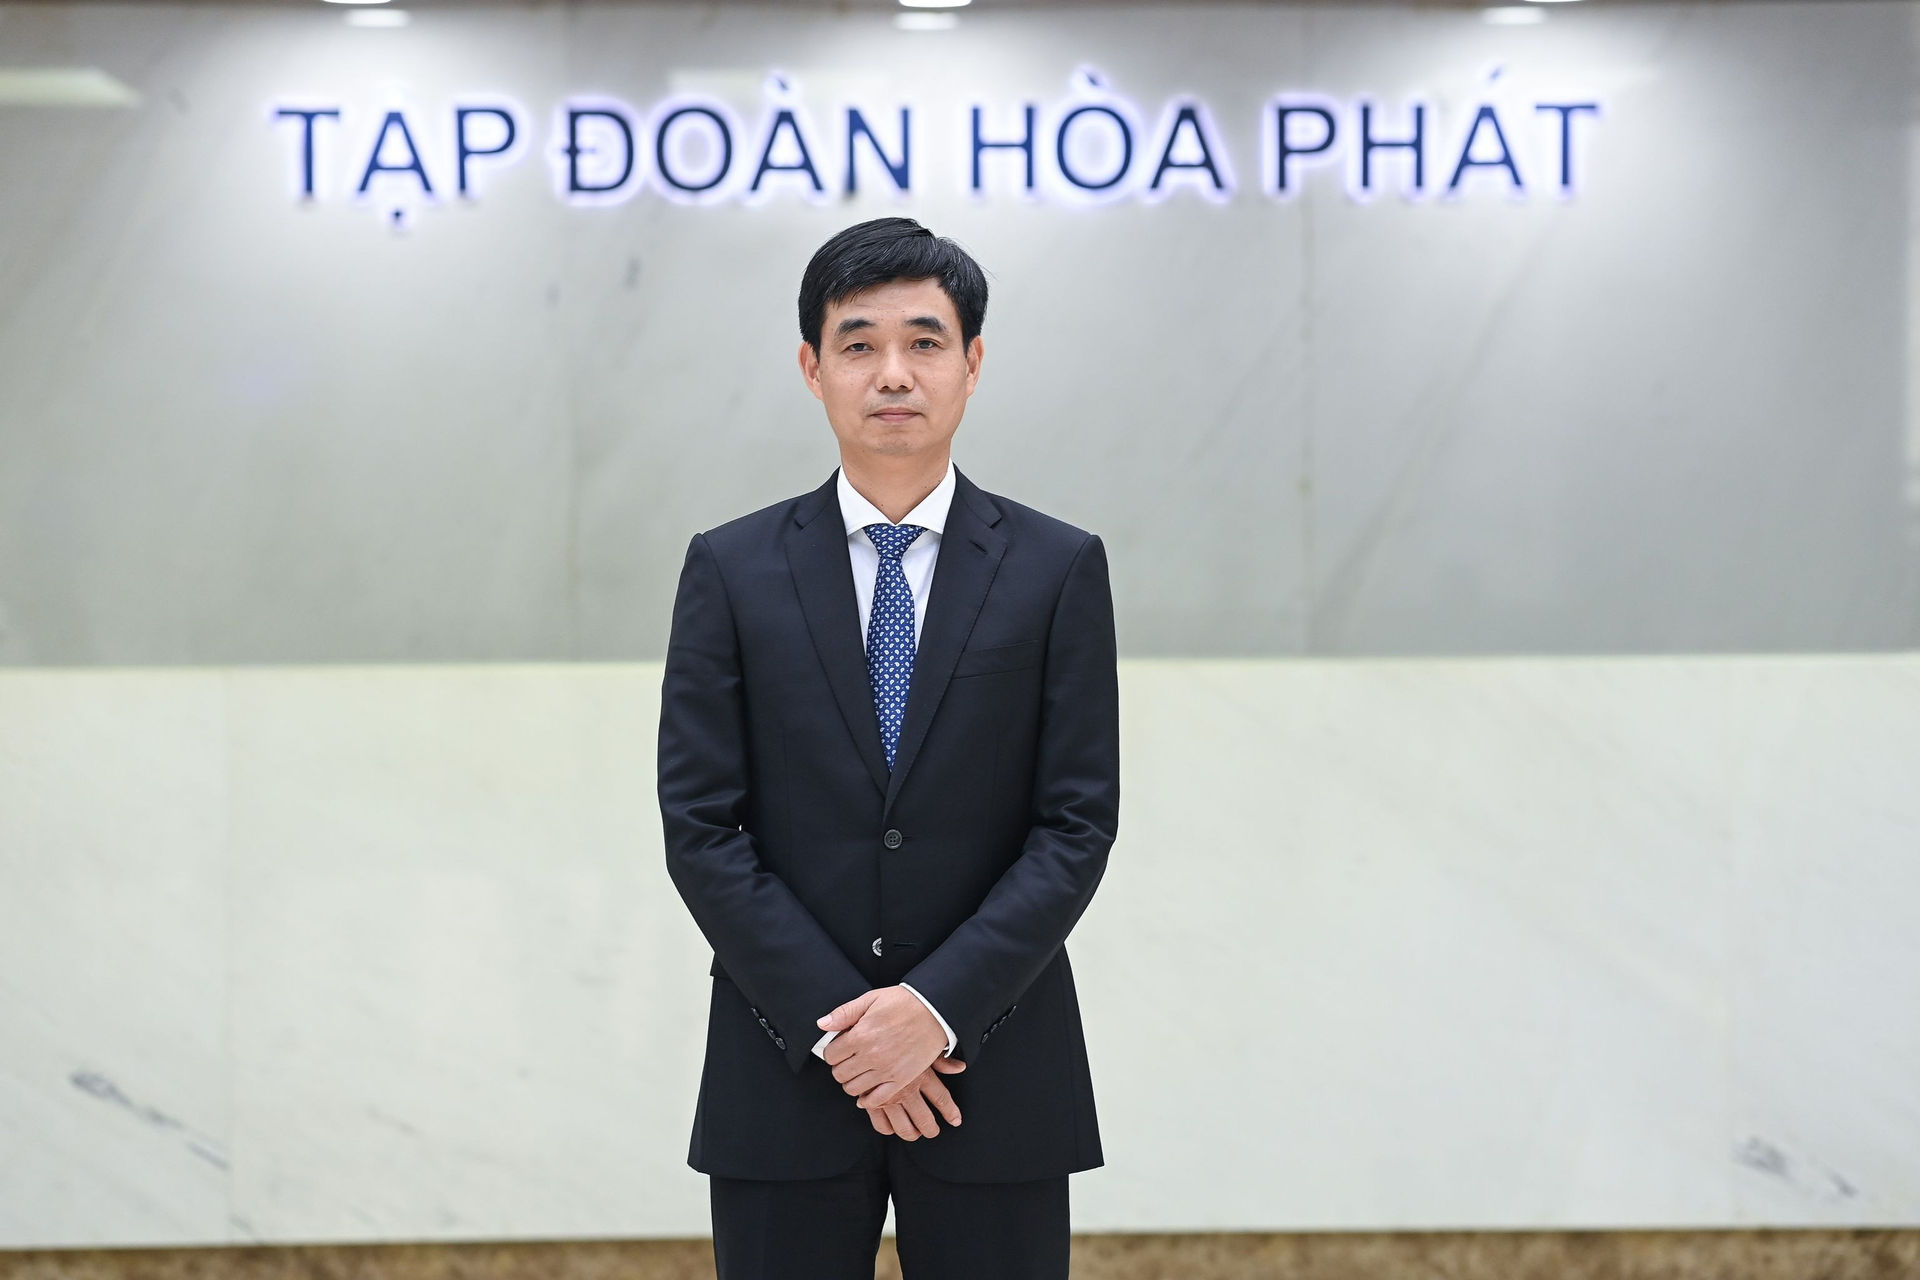 Tap doan Hoa Phat co CEO moi anh 1